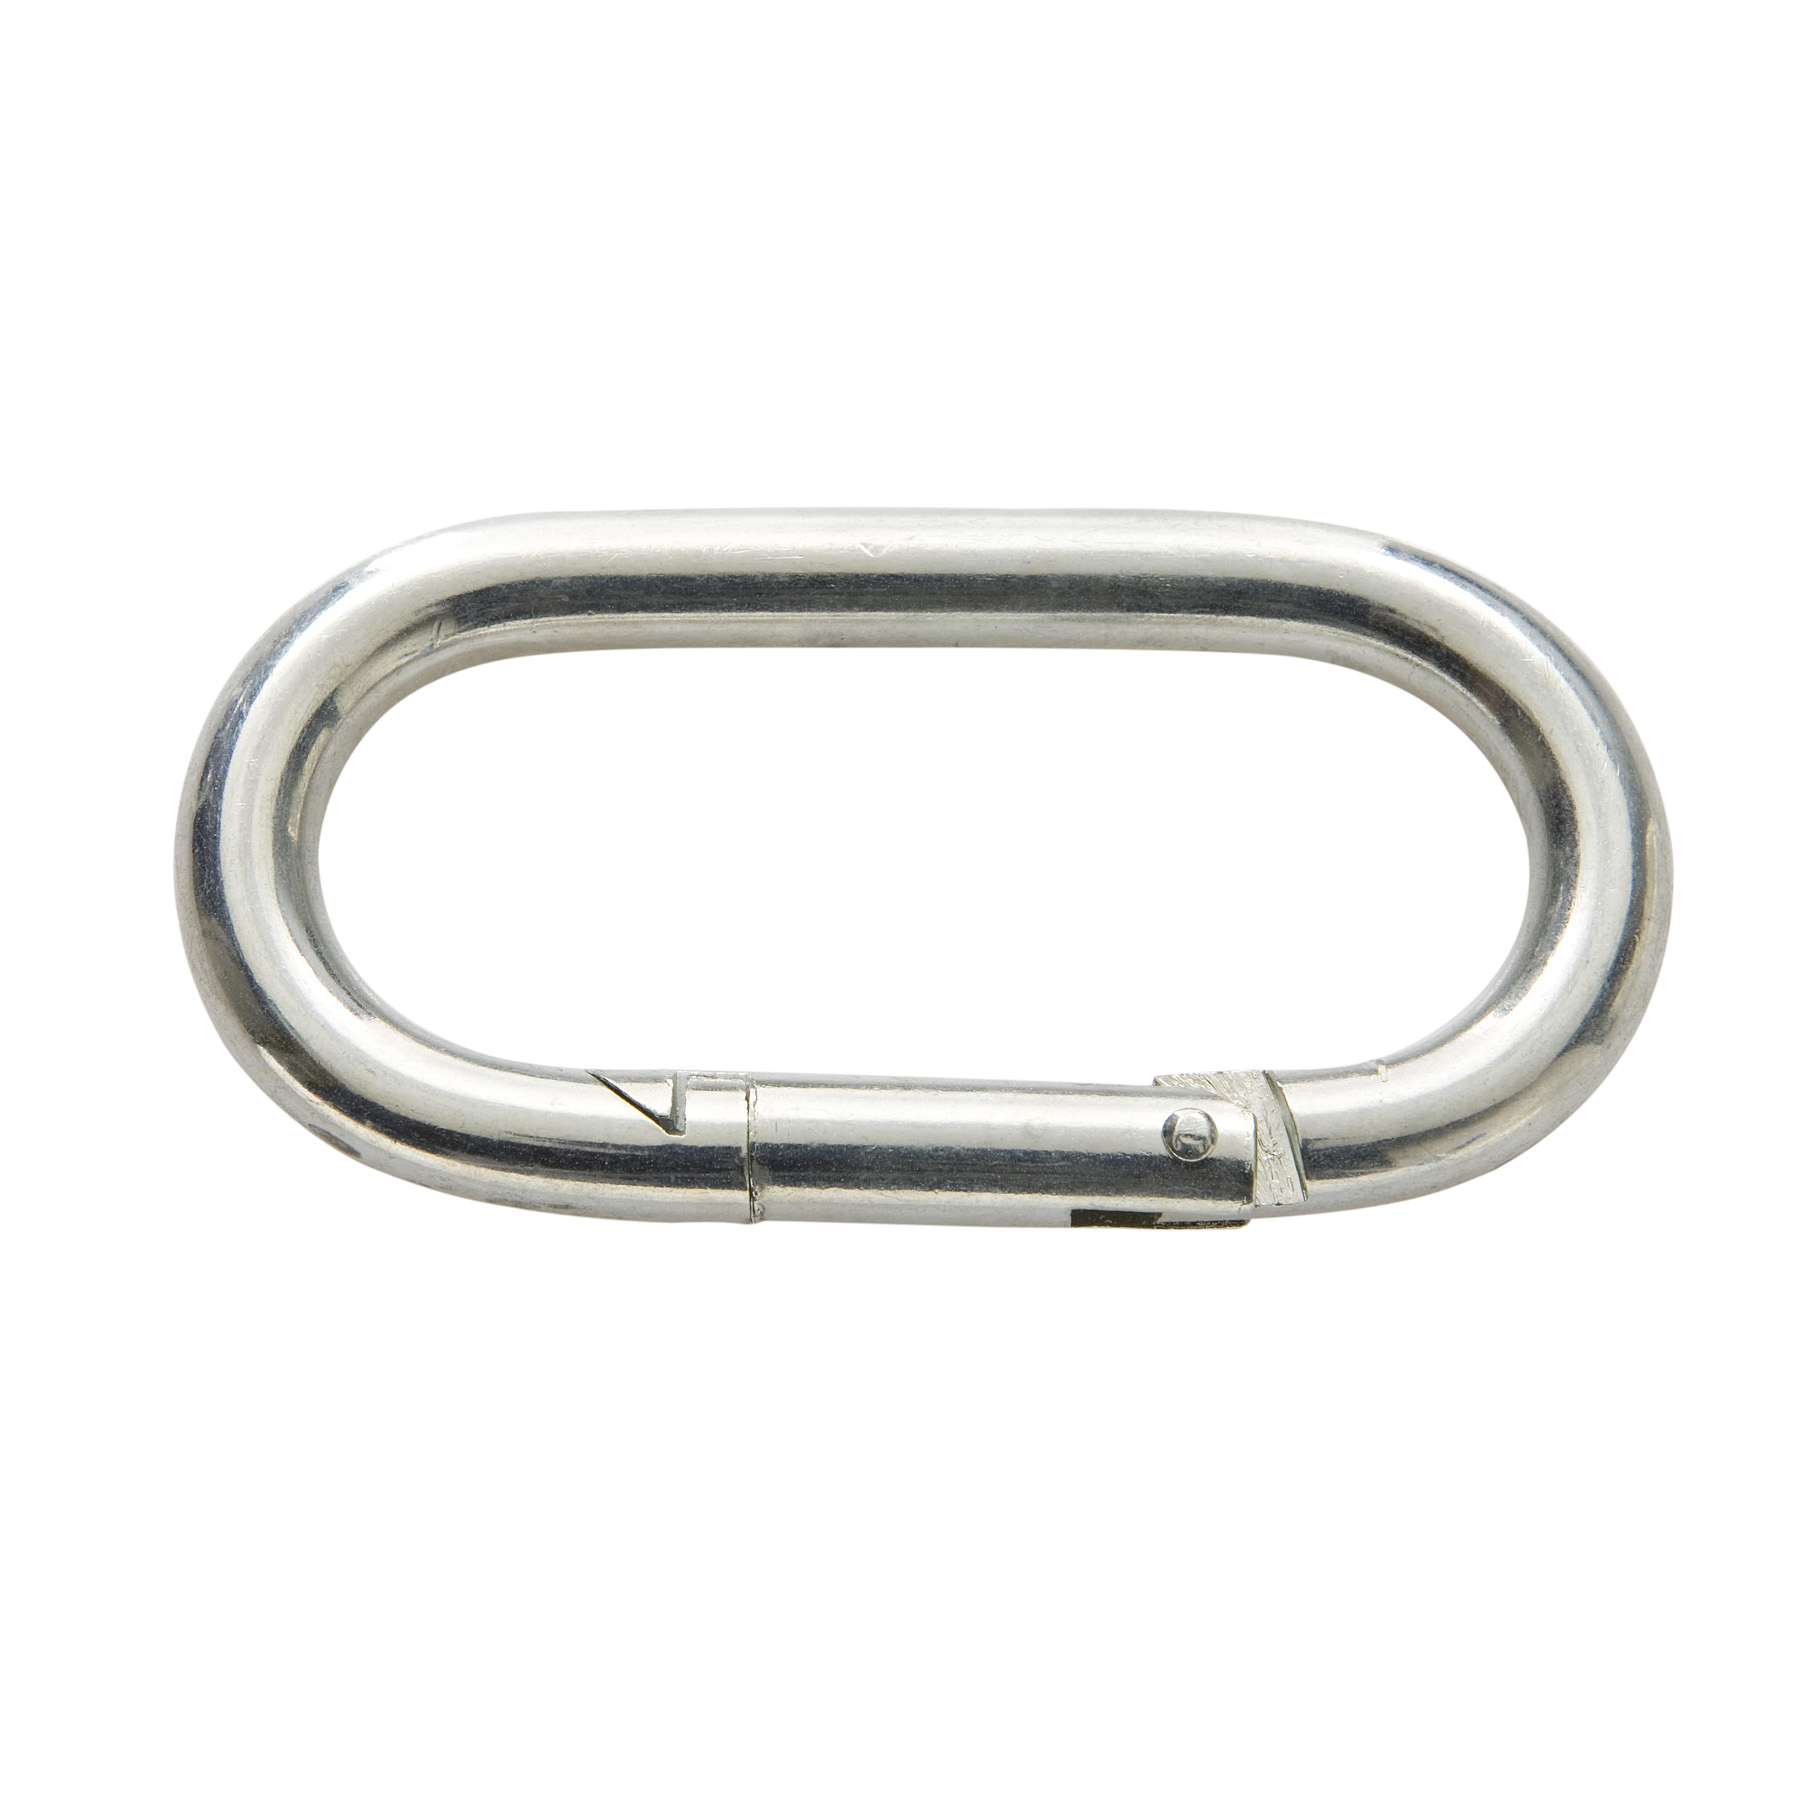 10 Pc. Zinc Plated Straight Oval Spring Snap Hook Carabiner 3/16